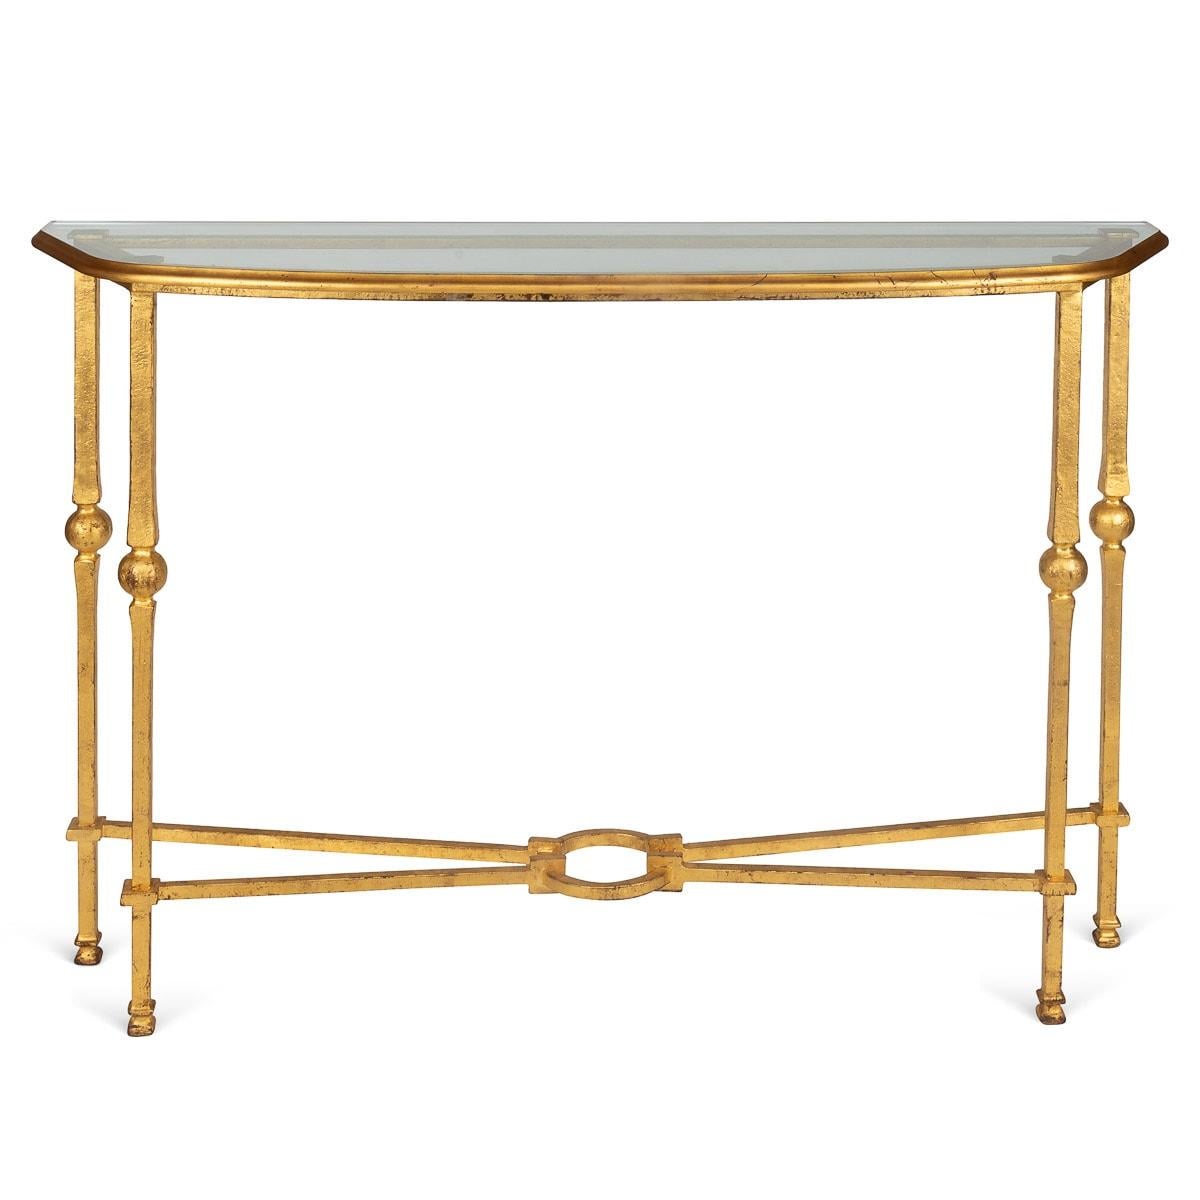 A stylish pair of 20th century French ormolu console tables, column legs with ball junctions, with four arms terminating in a circle, mounted with beautifully bezelled glass countertop. Elegant addition to any interior.

CONDITION
In Great